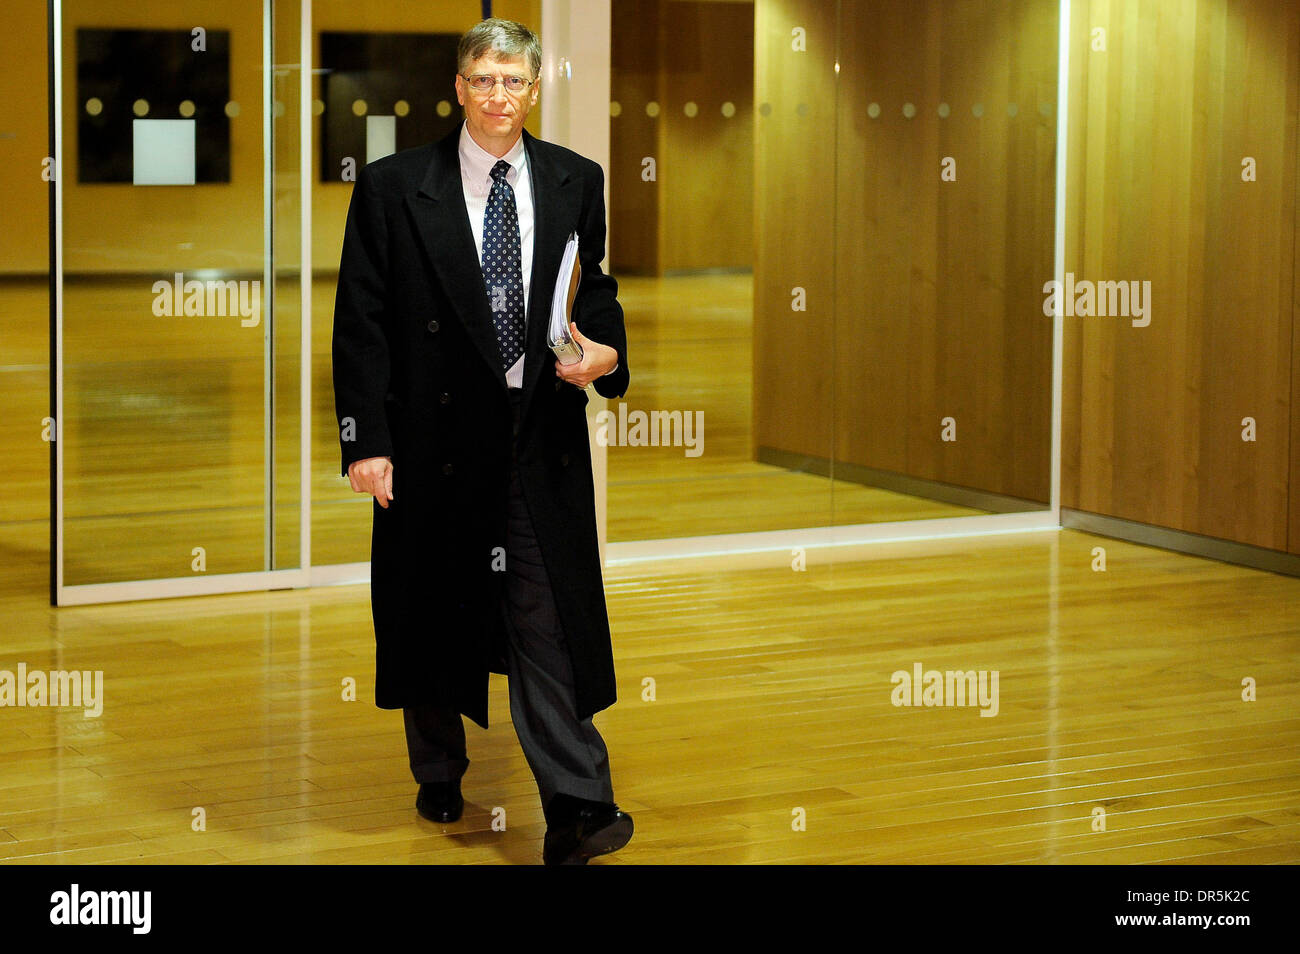 Jan 27, 2009 - Brussels, Belgium - The cofounder of Microsoft, President of the Bill and Melinda Gates foundation BILL GATES arrives for a bilateral meeting with European Commission President Jose Manuel Barroso at the European Commission headquarters  in Brussels, Belgium on 2009-01-27. (Credit Image: © Wiktor Dabkowski/ZUMA Press) Stock Photo